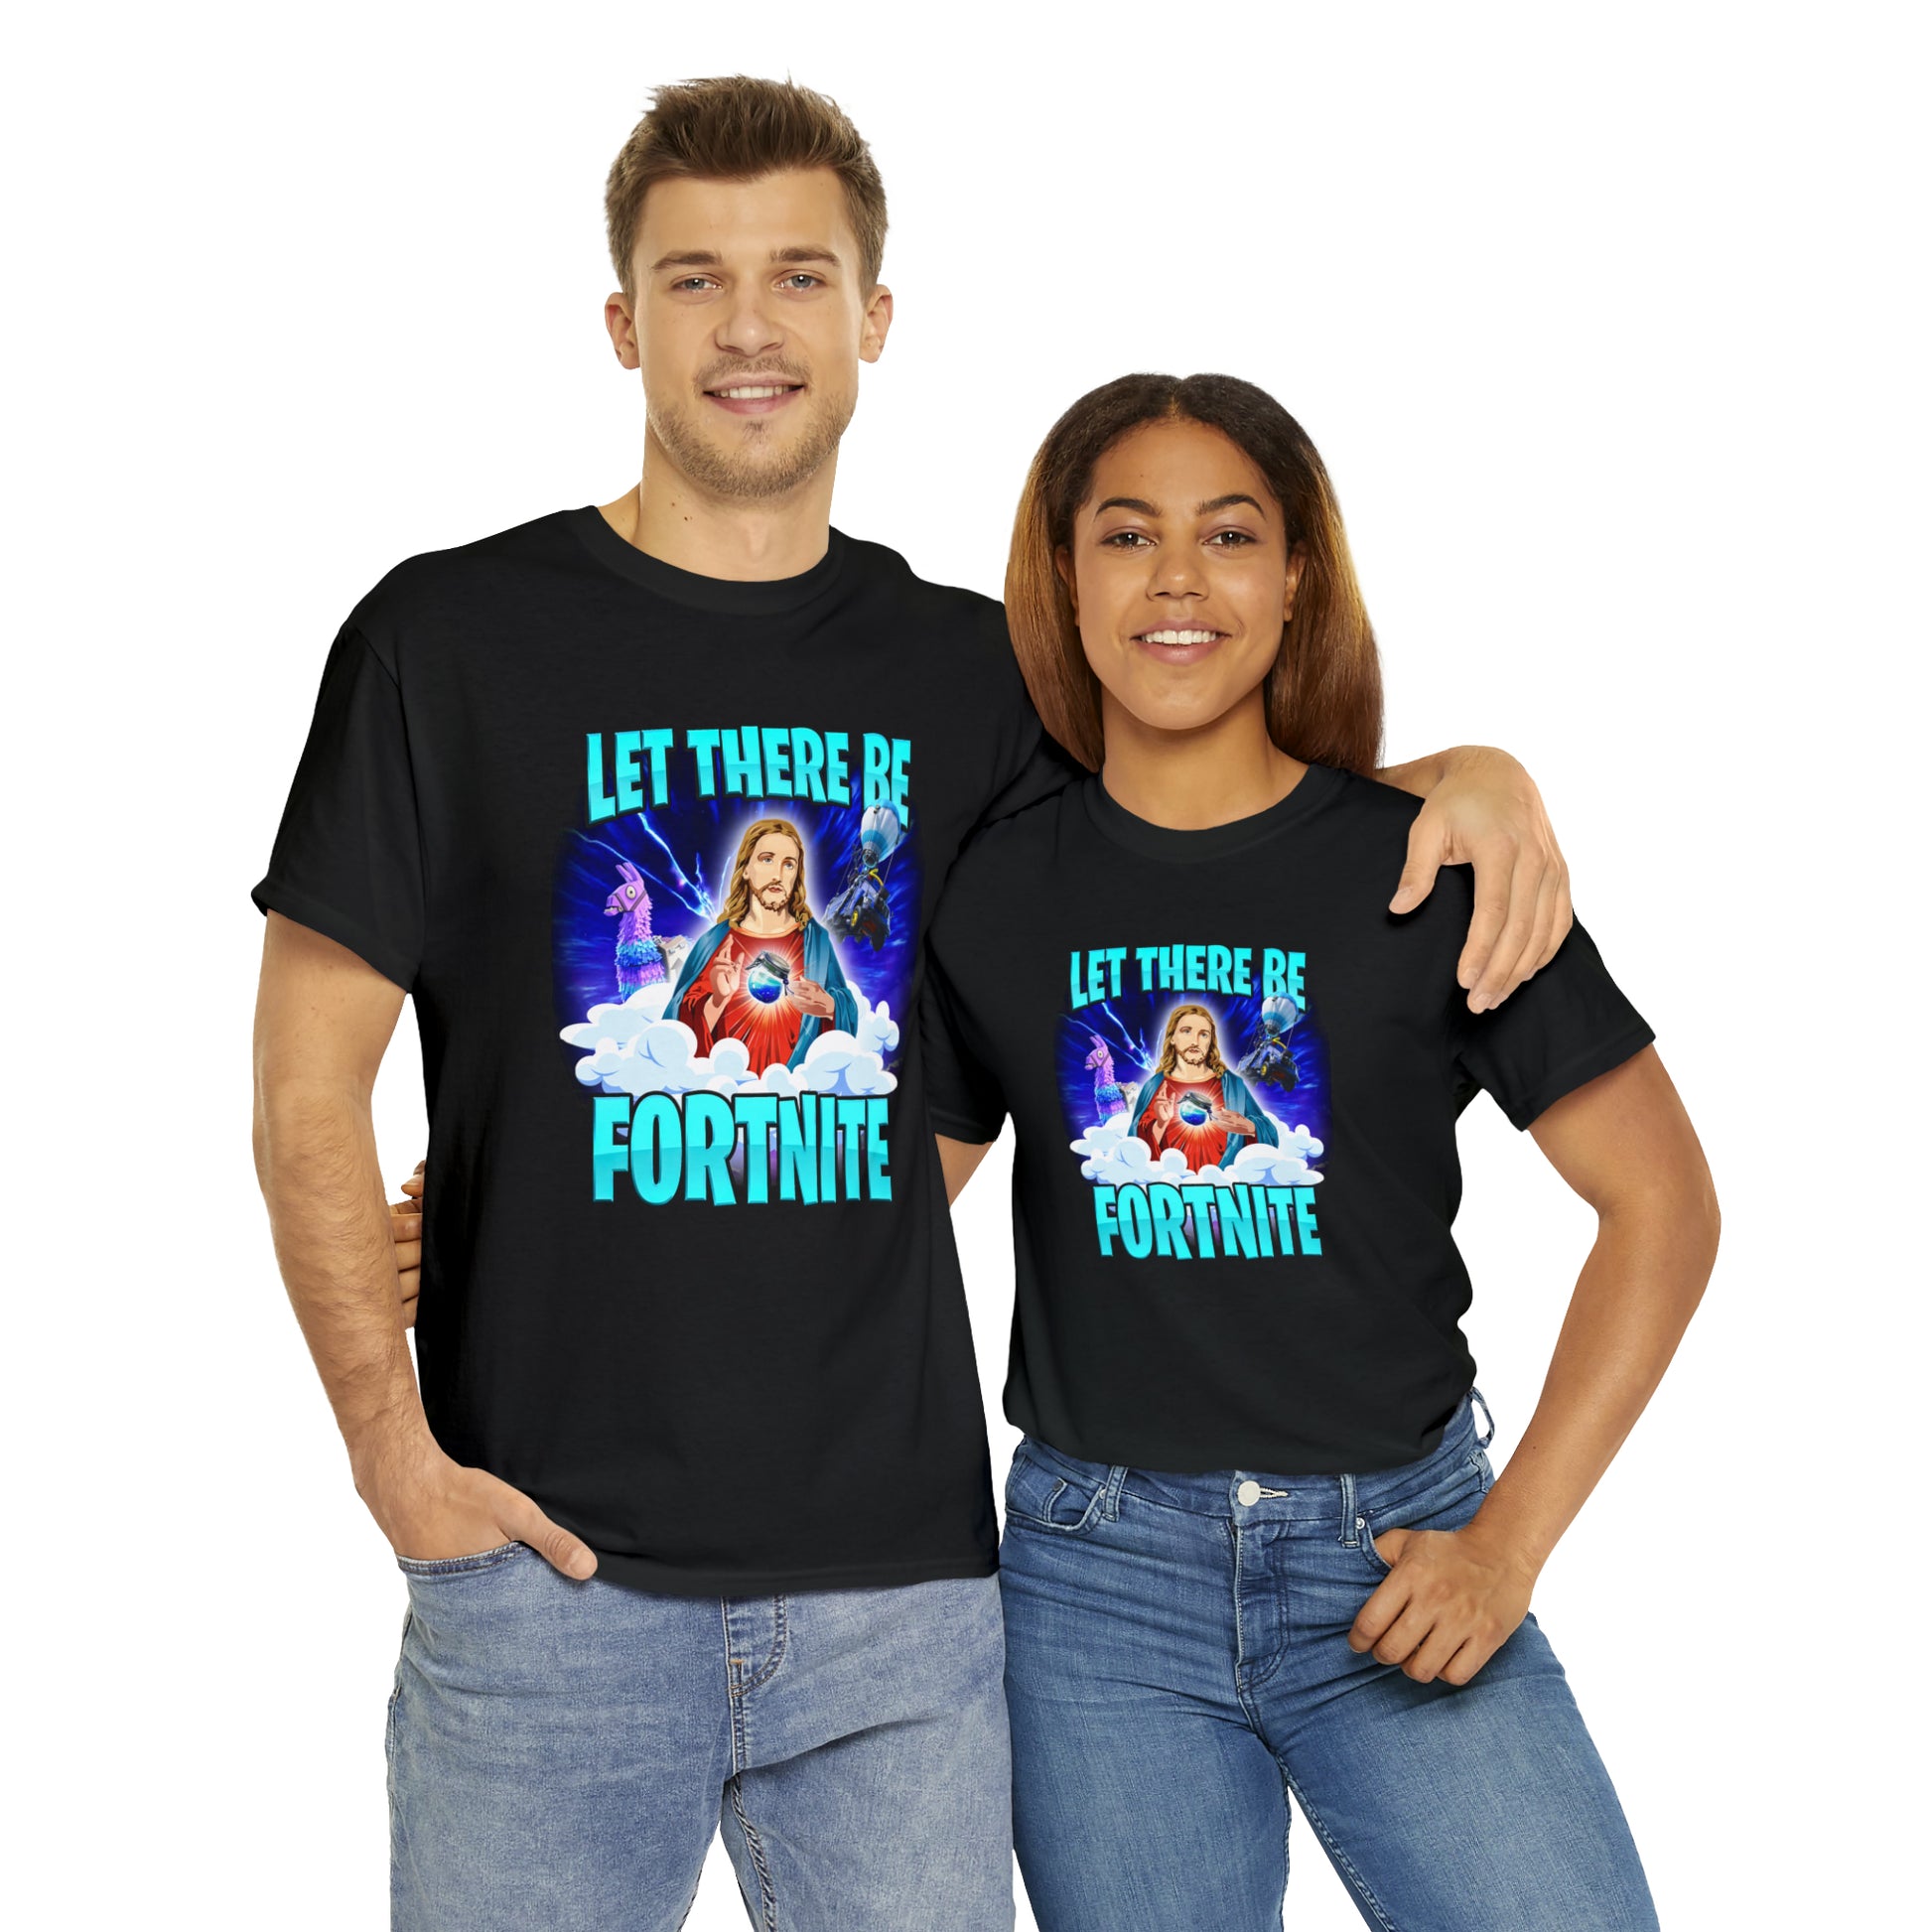 Let There Be Fortnite T-Shirt! – Not Safe for Wear!